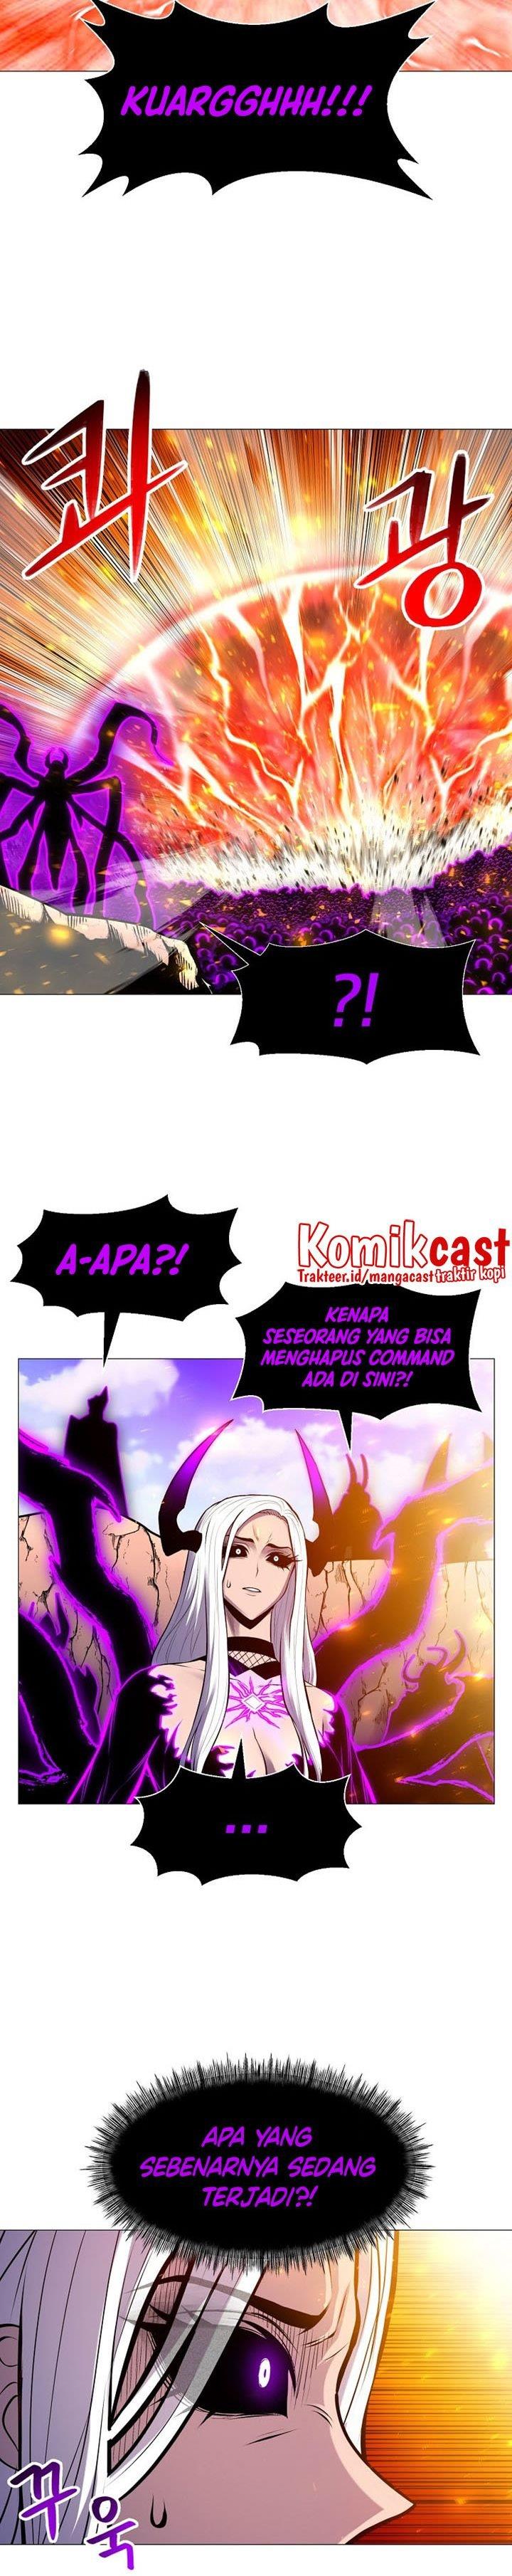 Updater Chapter 87